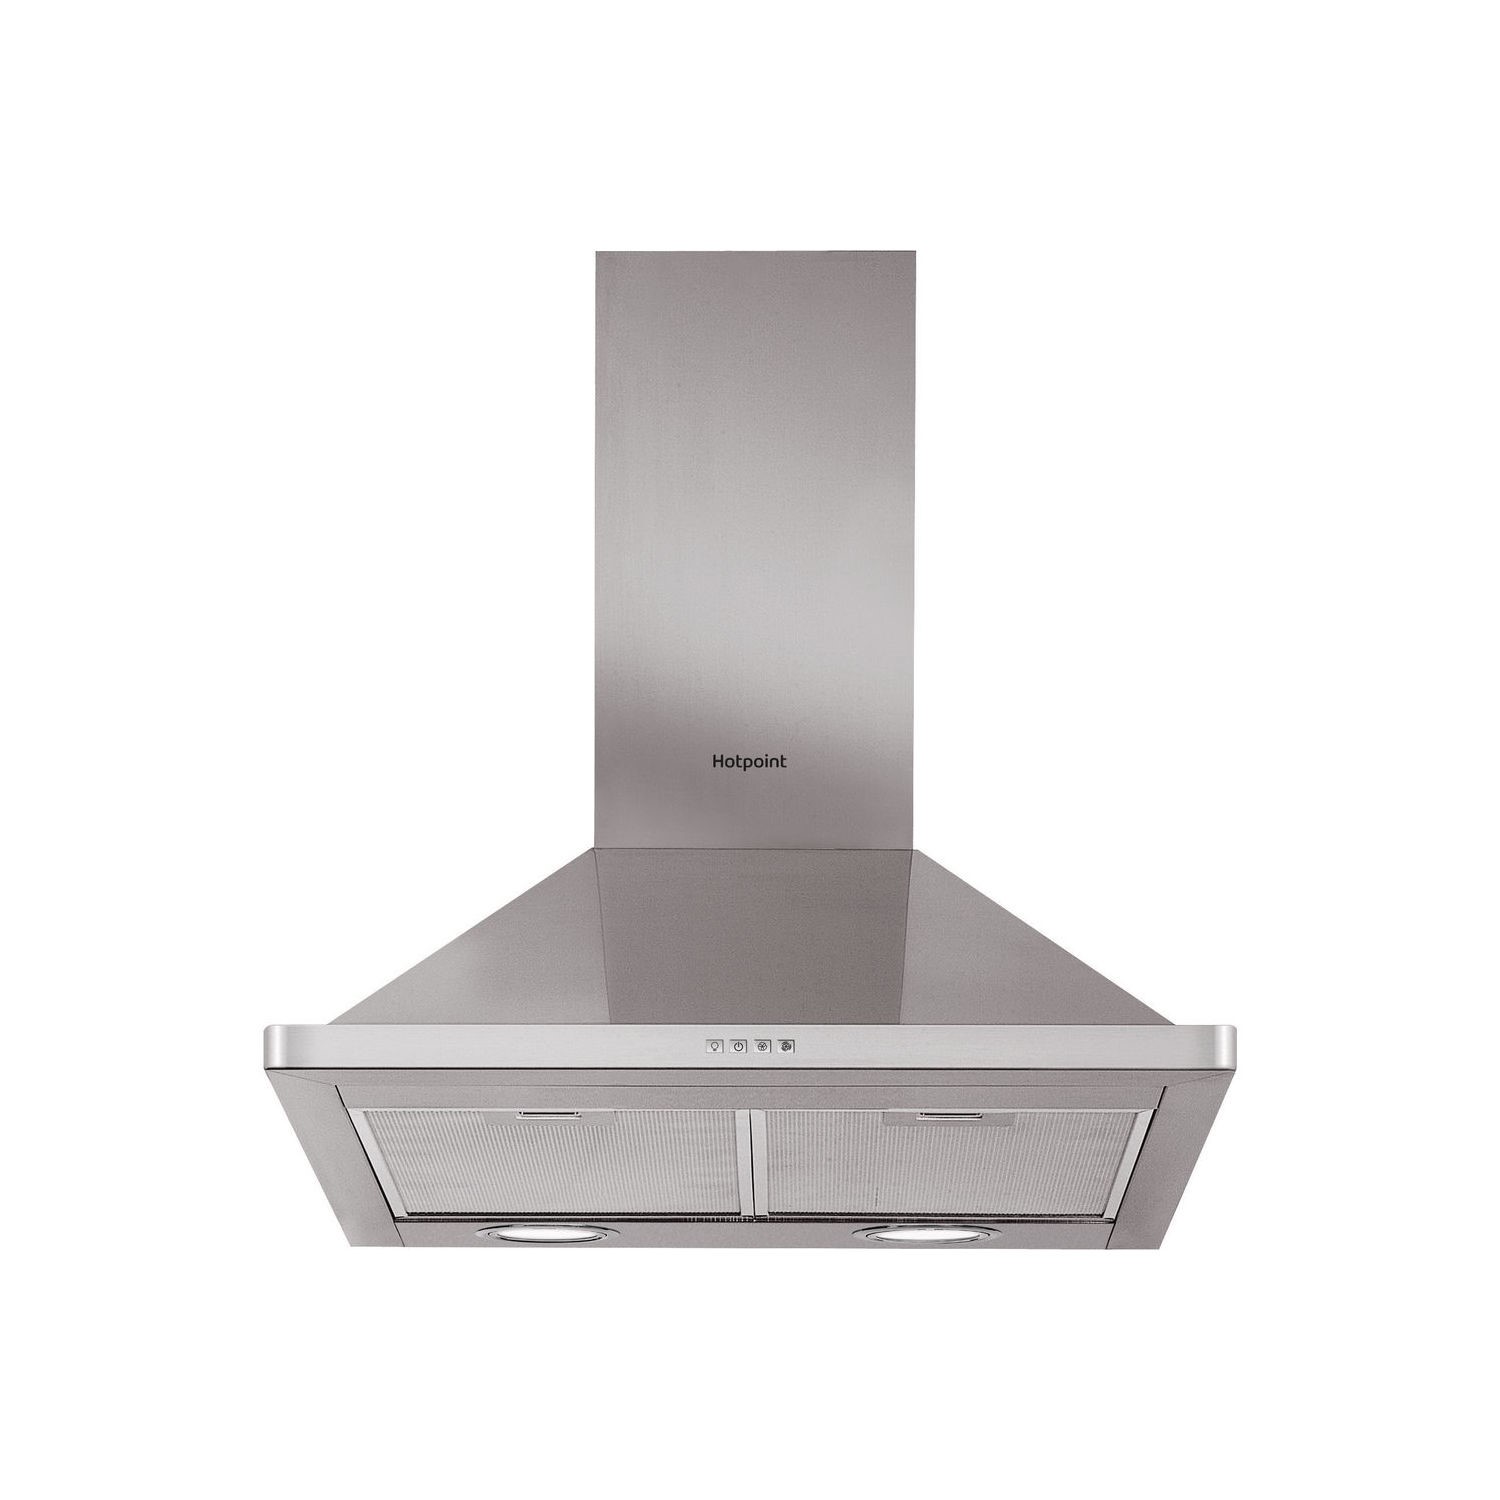 Refurbished Hotpoint PHPN75FLMX 70cm Chimney Cooker Hood Stainless Steel